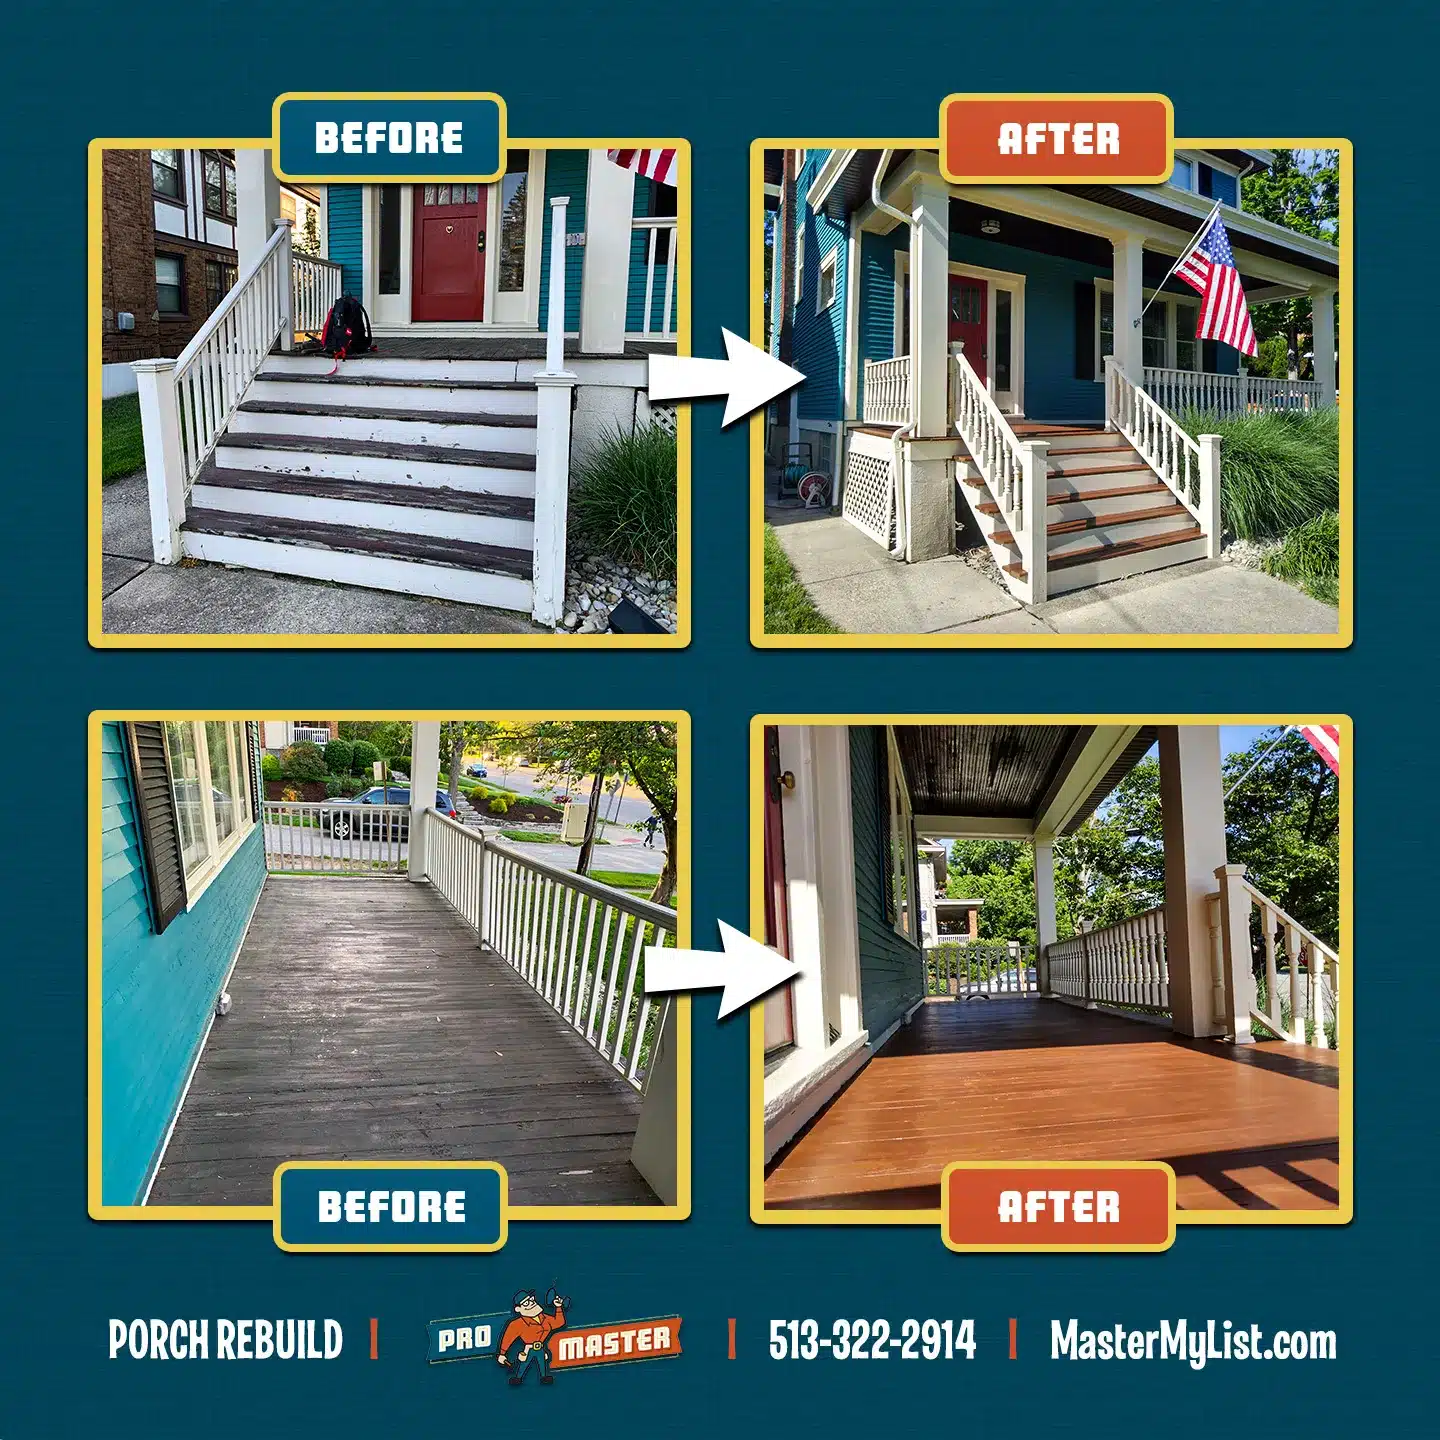 Before and After porch remodel completed by Hyde Park handyman.